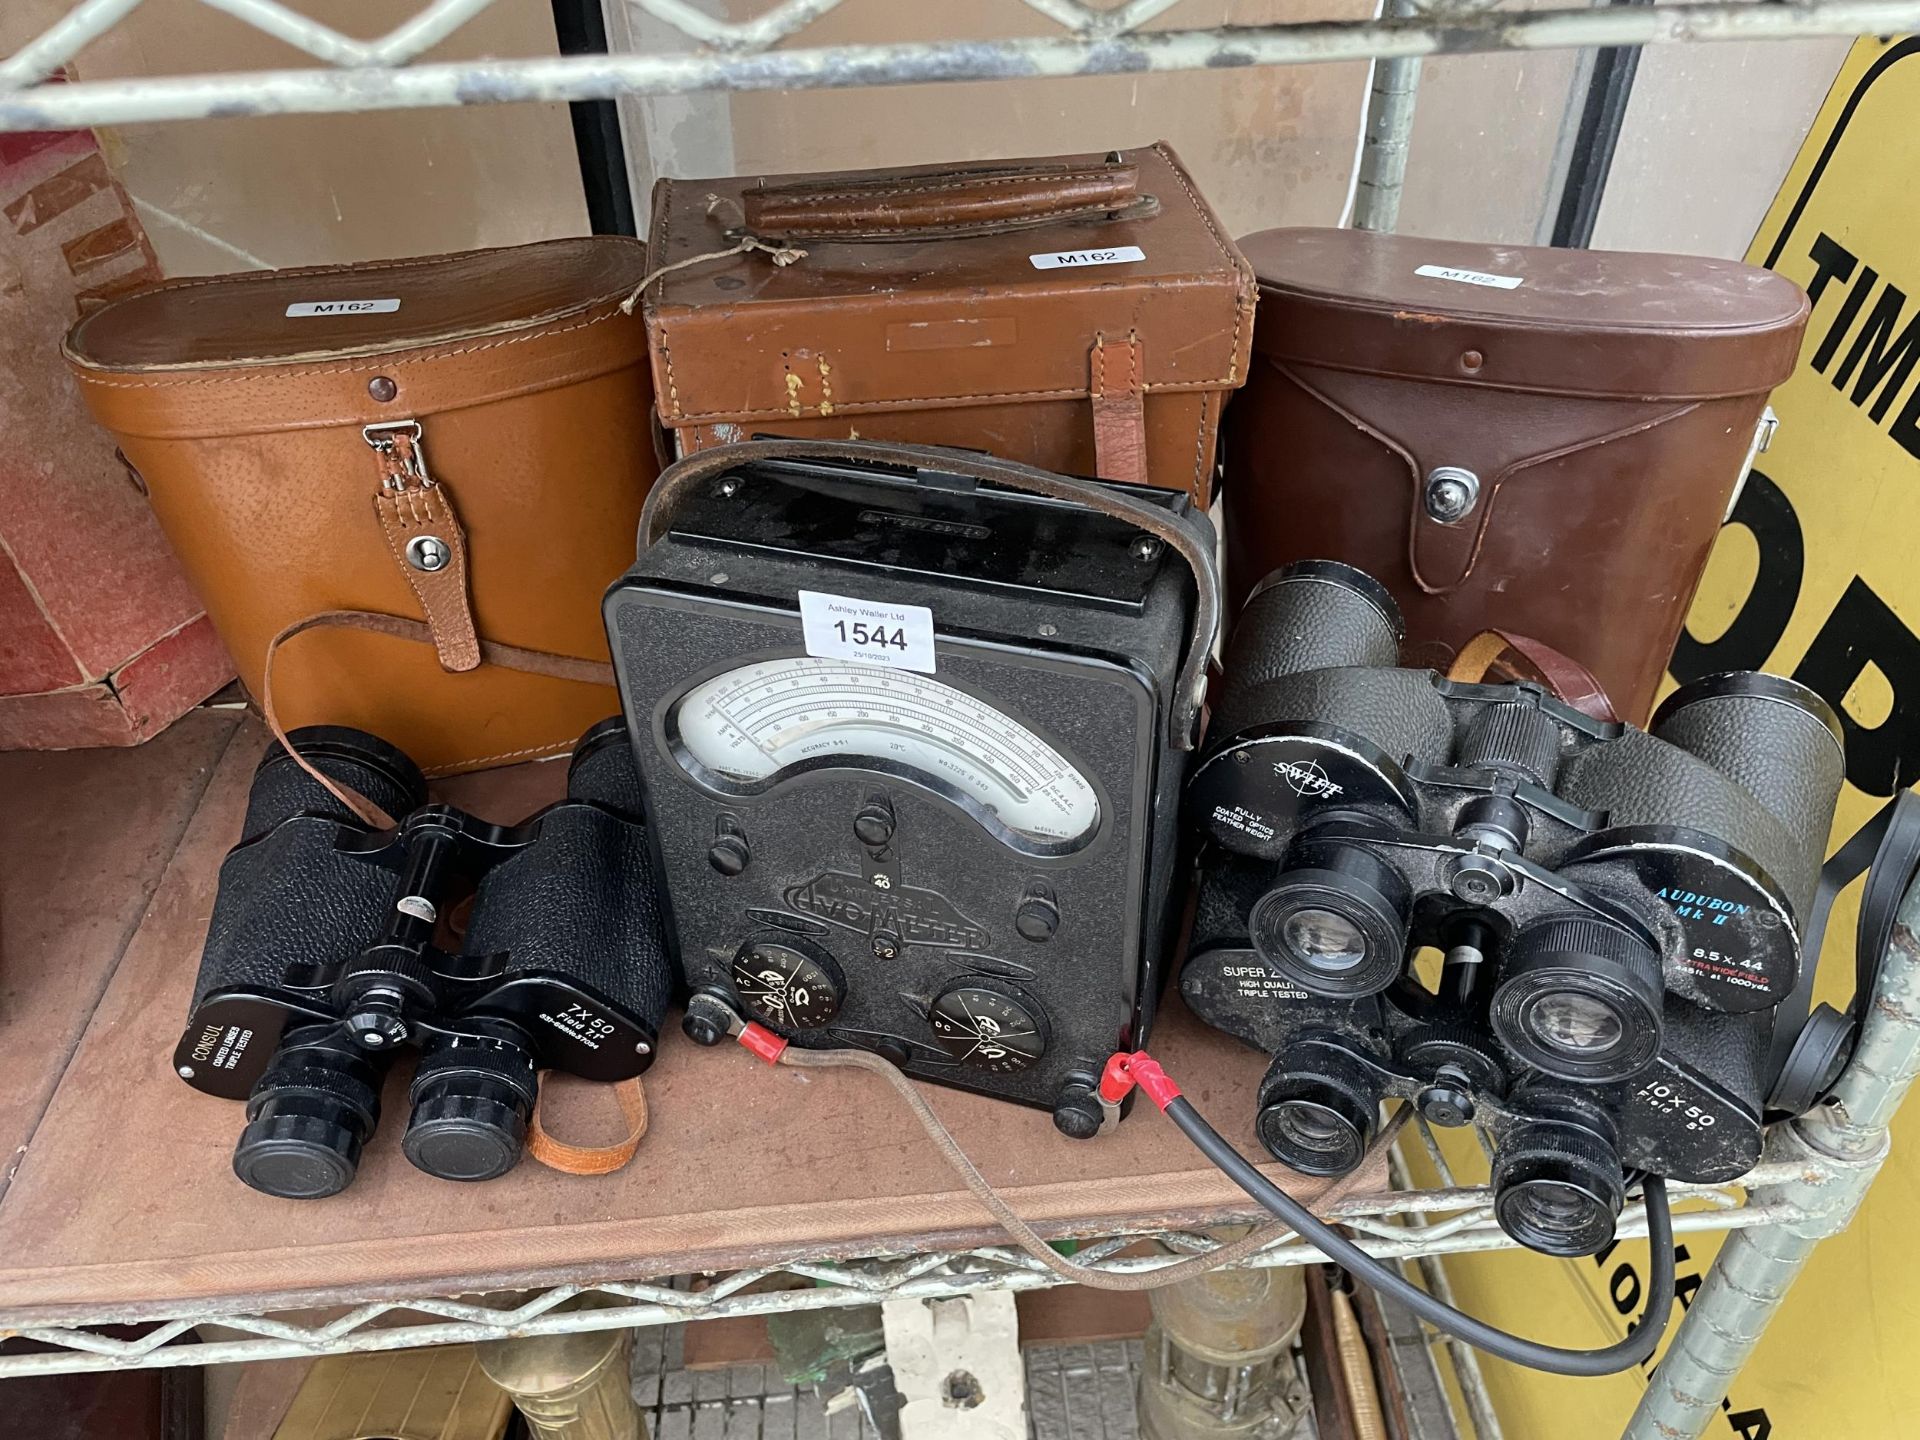 THREE SETS OF BINOCULARS WITH CASES AND A VINTAGE AVOMETER WITH CARRY CASE